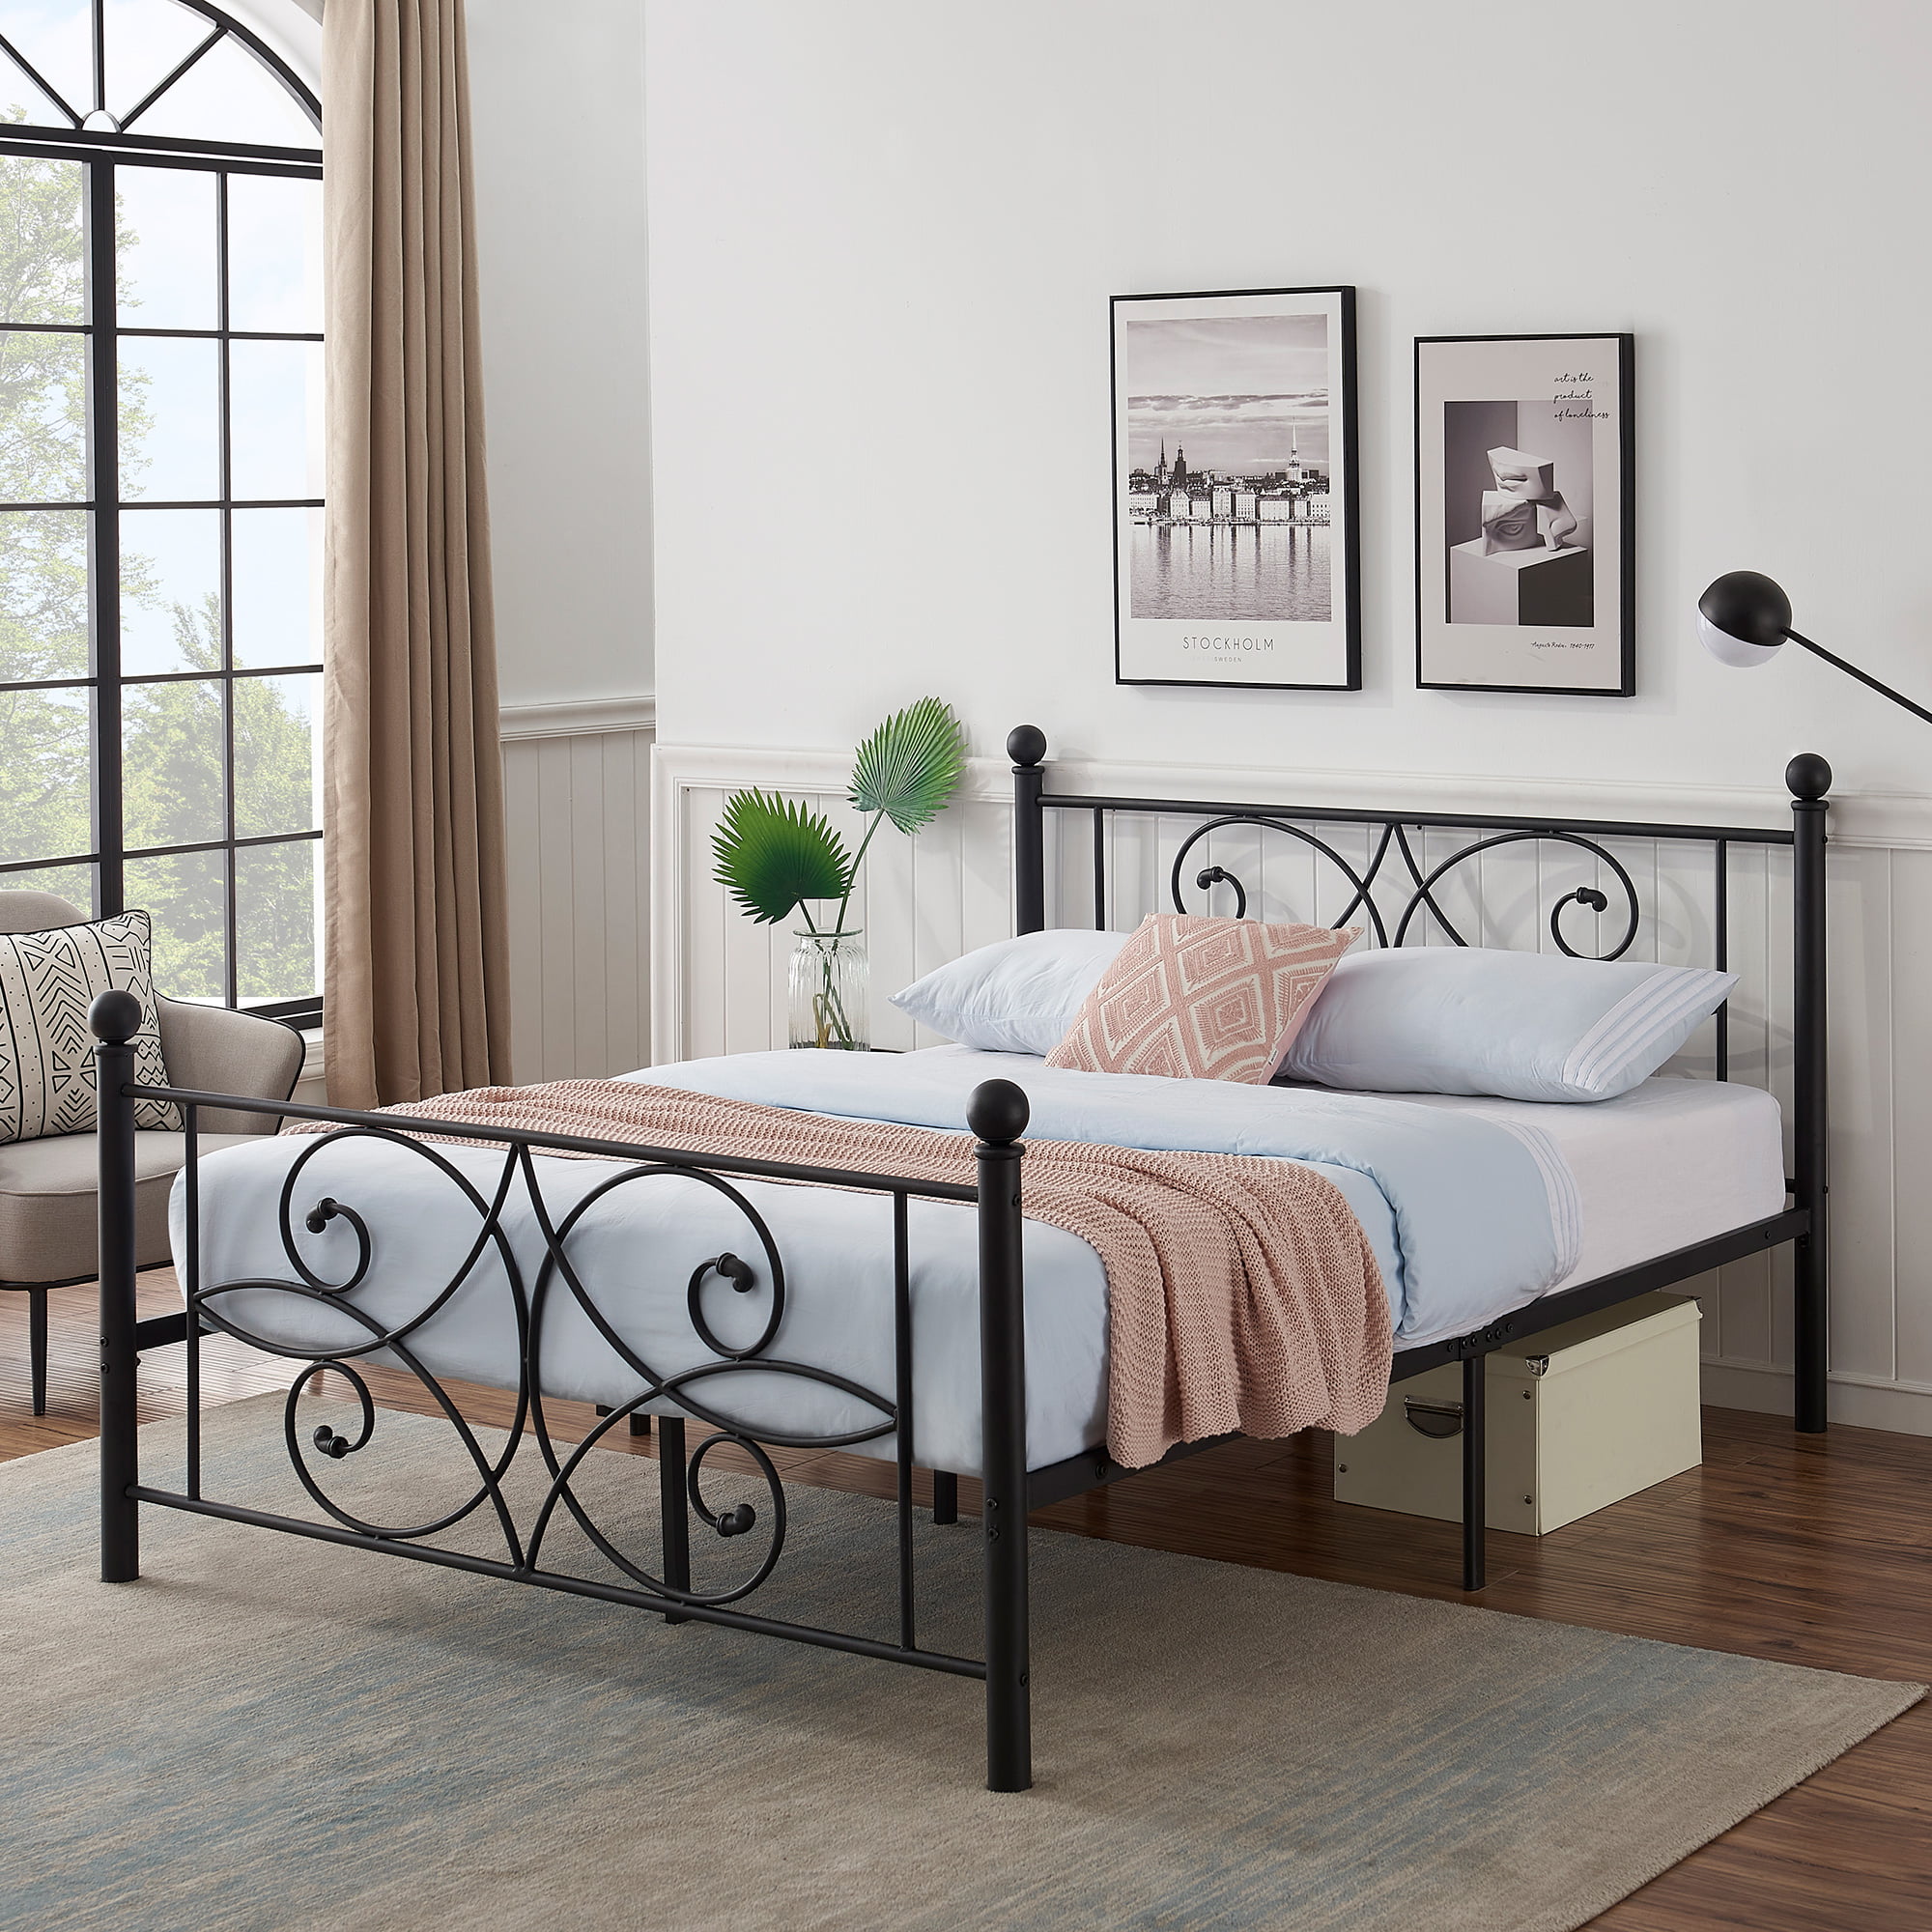 VECELO Full Size Traditional Metal Bed Frame/Platform Bed with